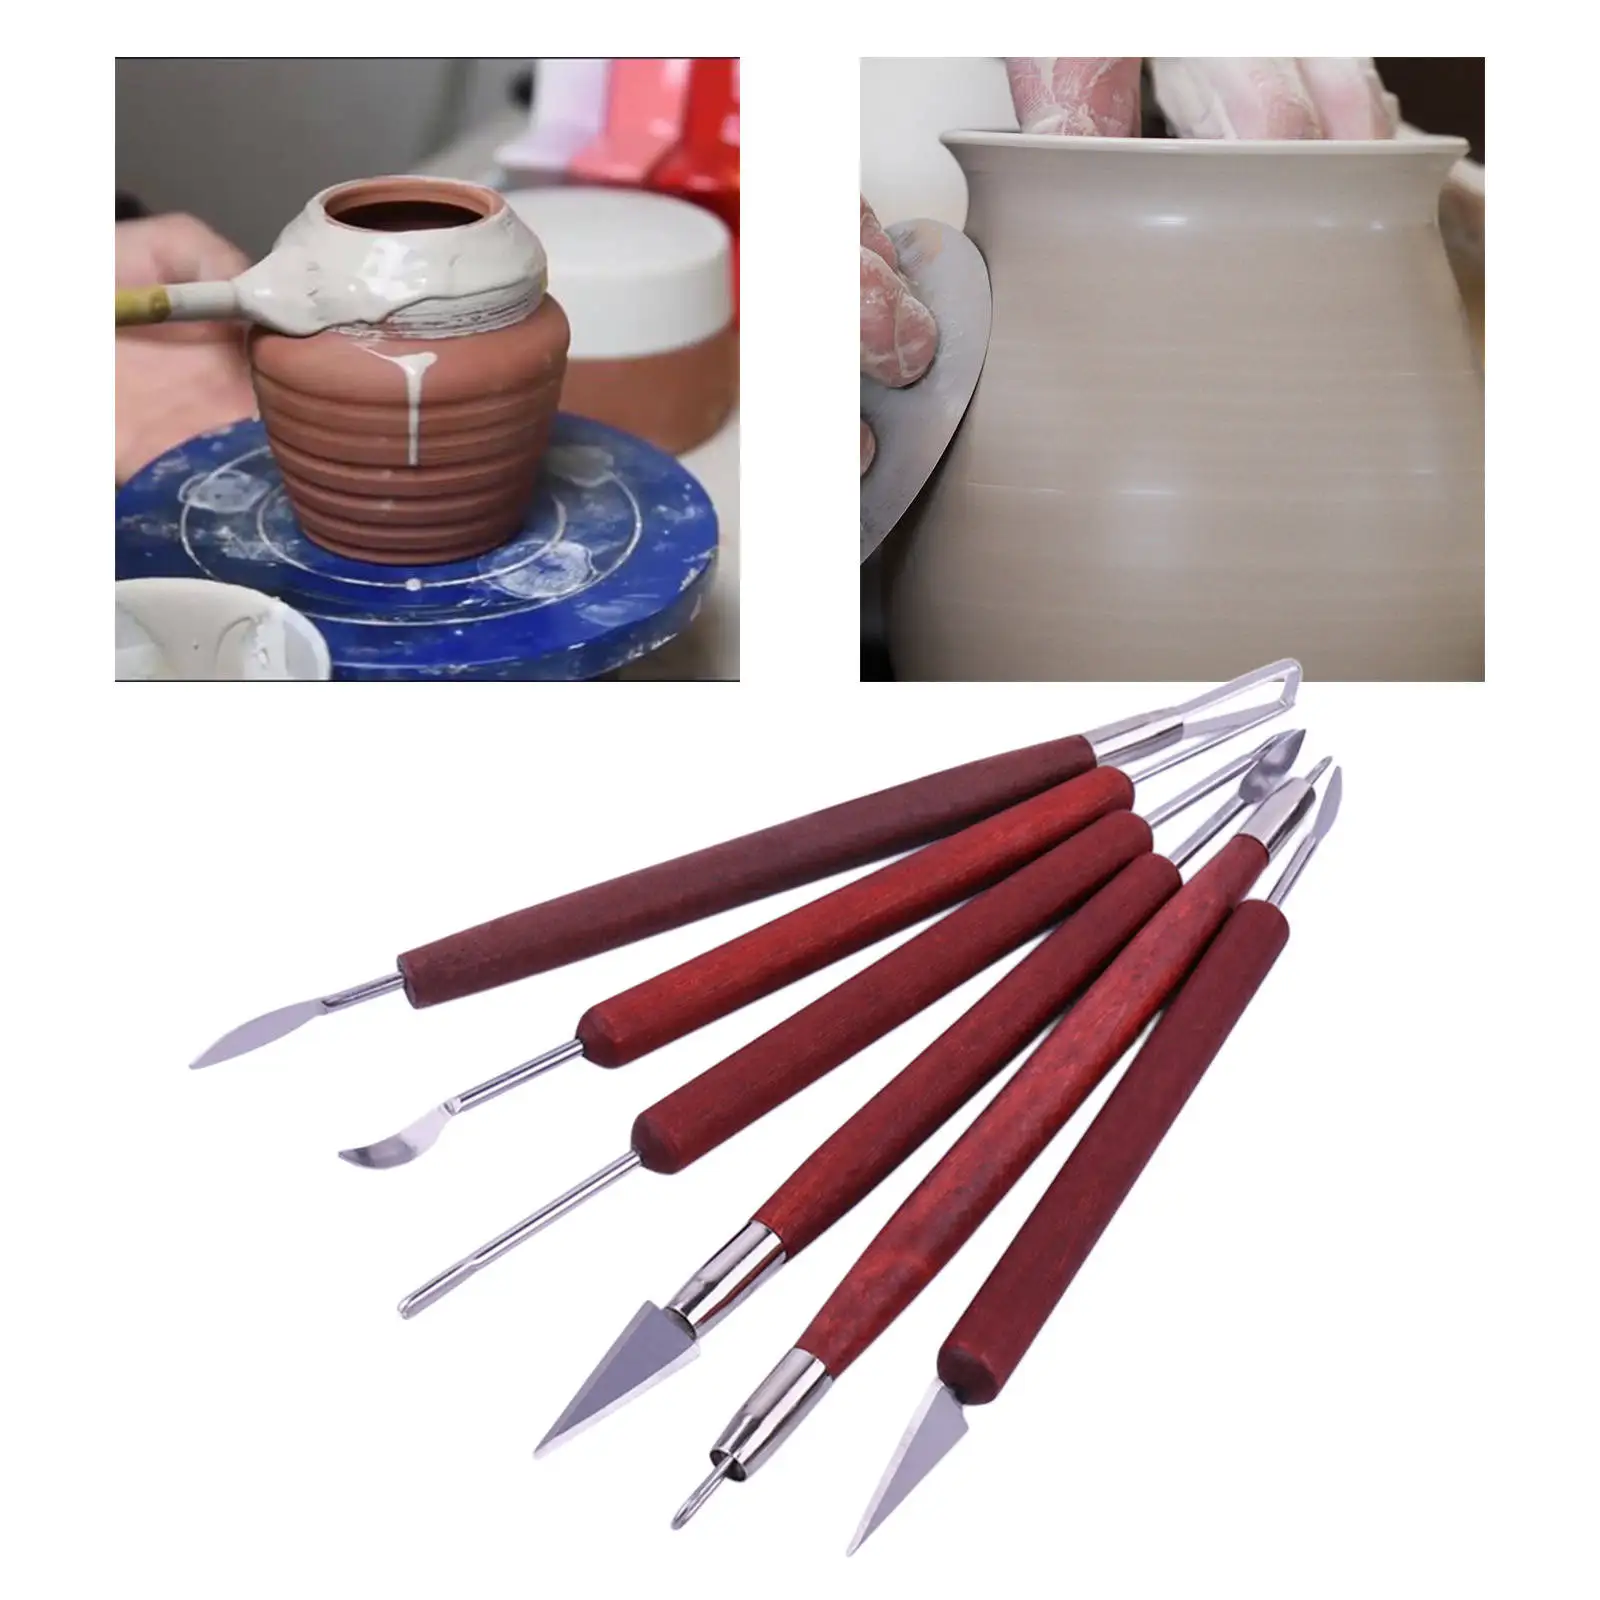 6 Pcs/Set Pottery Clay Sculpting Tools Kit Double-Ended with Wooden Handle Wax Carving Tool Ceramic Modeling for Shapers Student